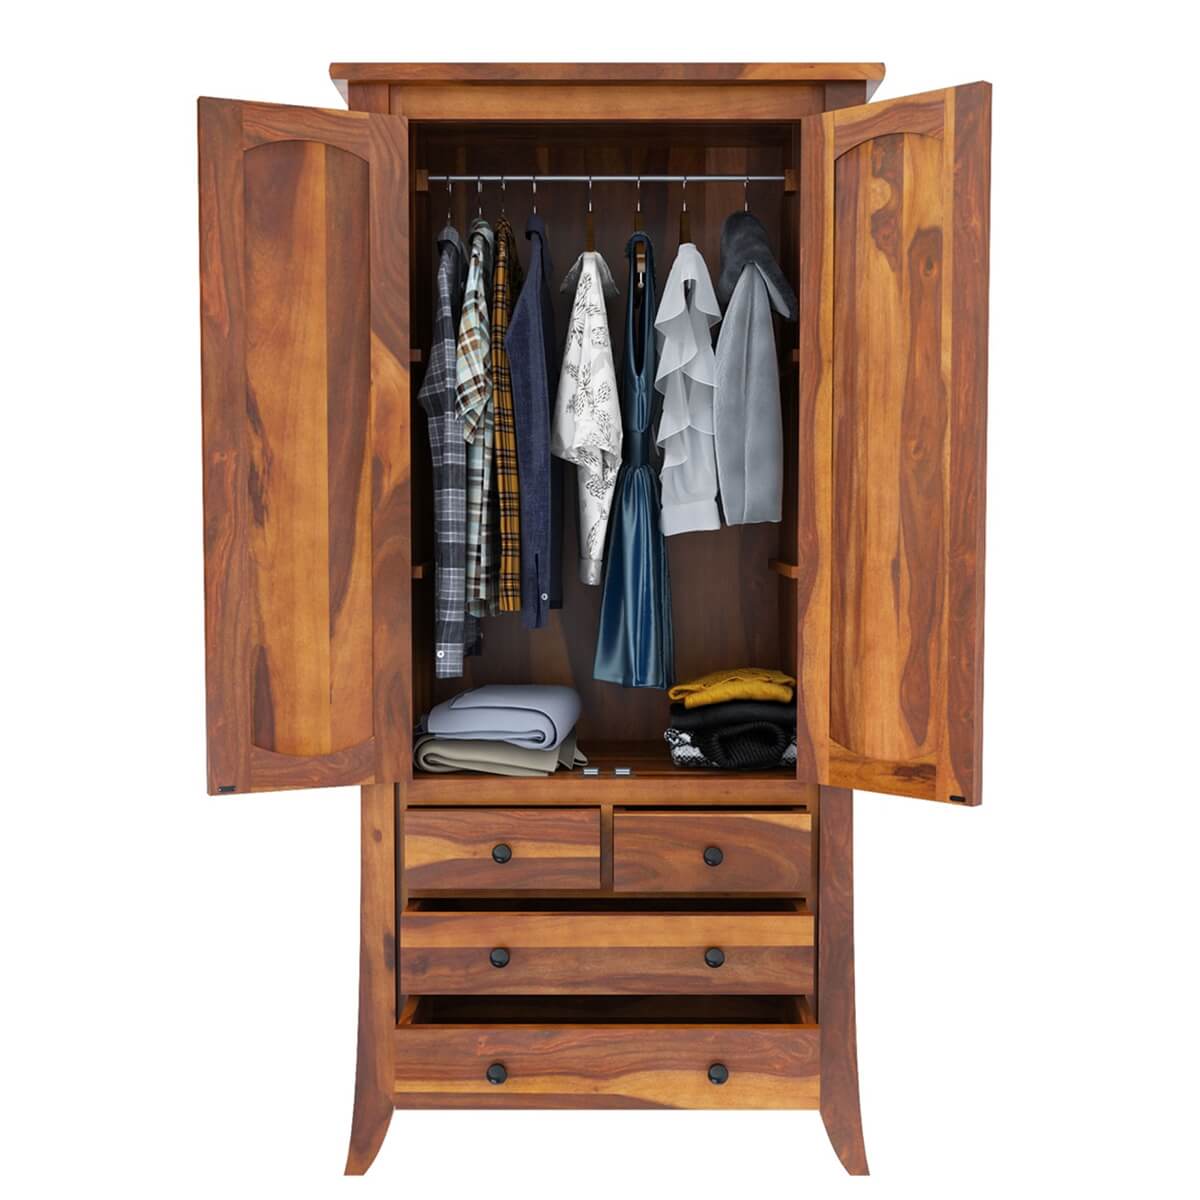 Royal Palace Wardrobe Solid Sheesham Wood Two Door With Four Drawers Drawers In Natural Finish For Bedroom Furniture